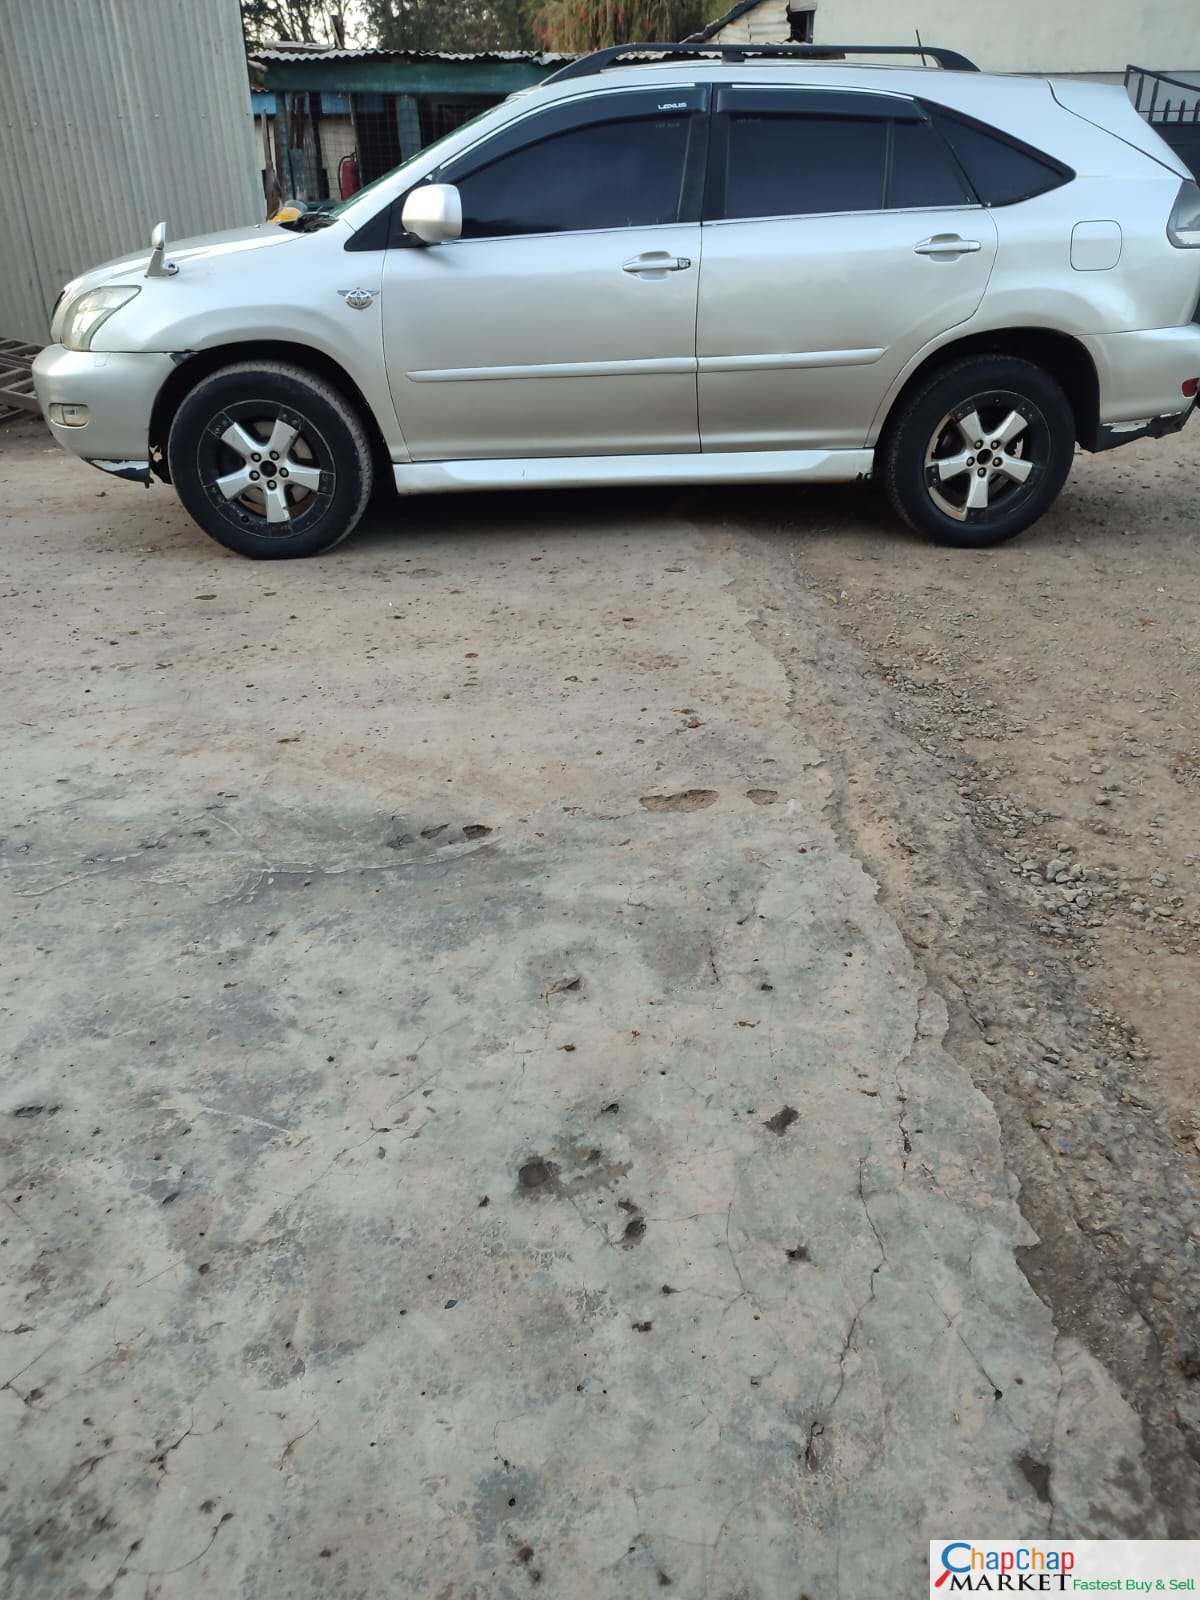 Cars Cars For Sale-Toyota Harrier kenya 620K ONLY You Pay 30% Deposit Trade in OK harrier for sale in kenya hire purchase installments EXCLUSIVE 9